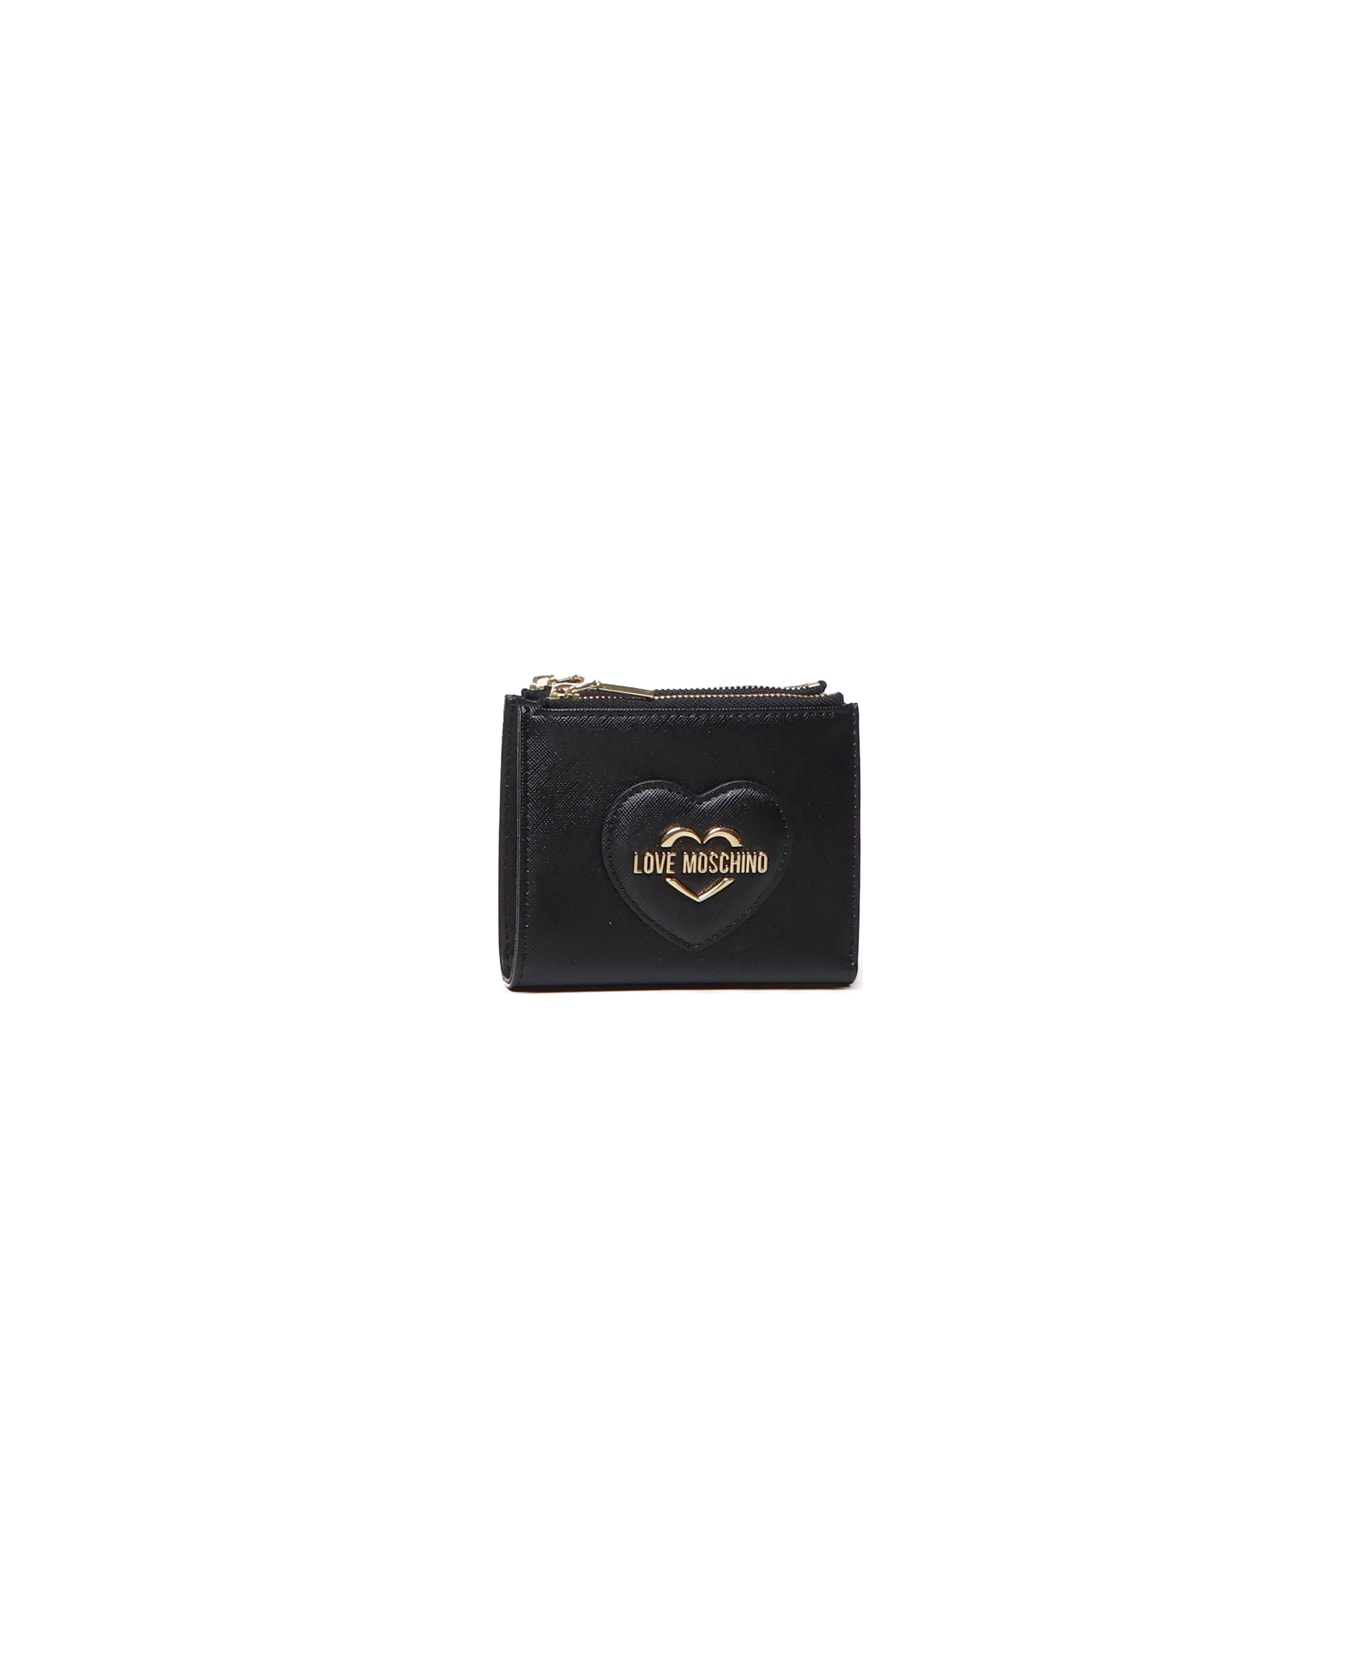 Love Moschino Wallet With Print - Black